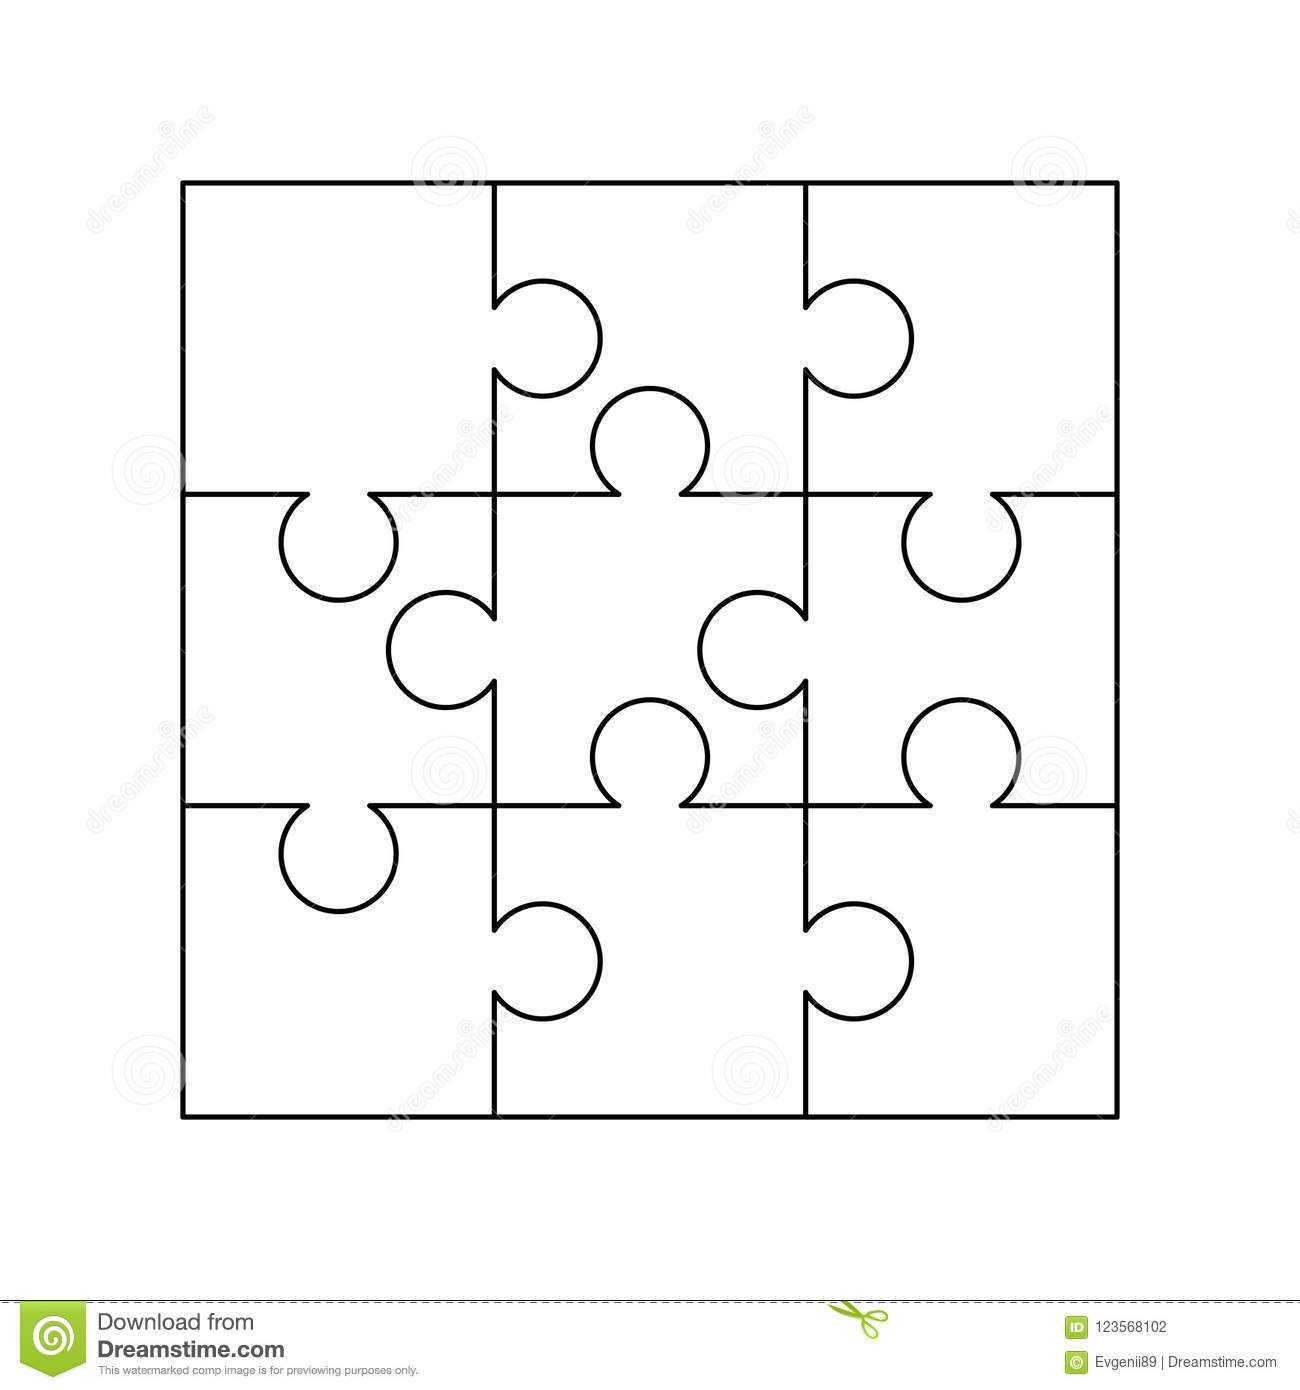 9 White Puzzles Pieces Arranged In A Square. Jigsaw Puzzle Intended For Jigsaw Puzzle Template For Word